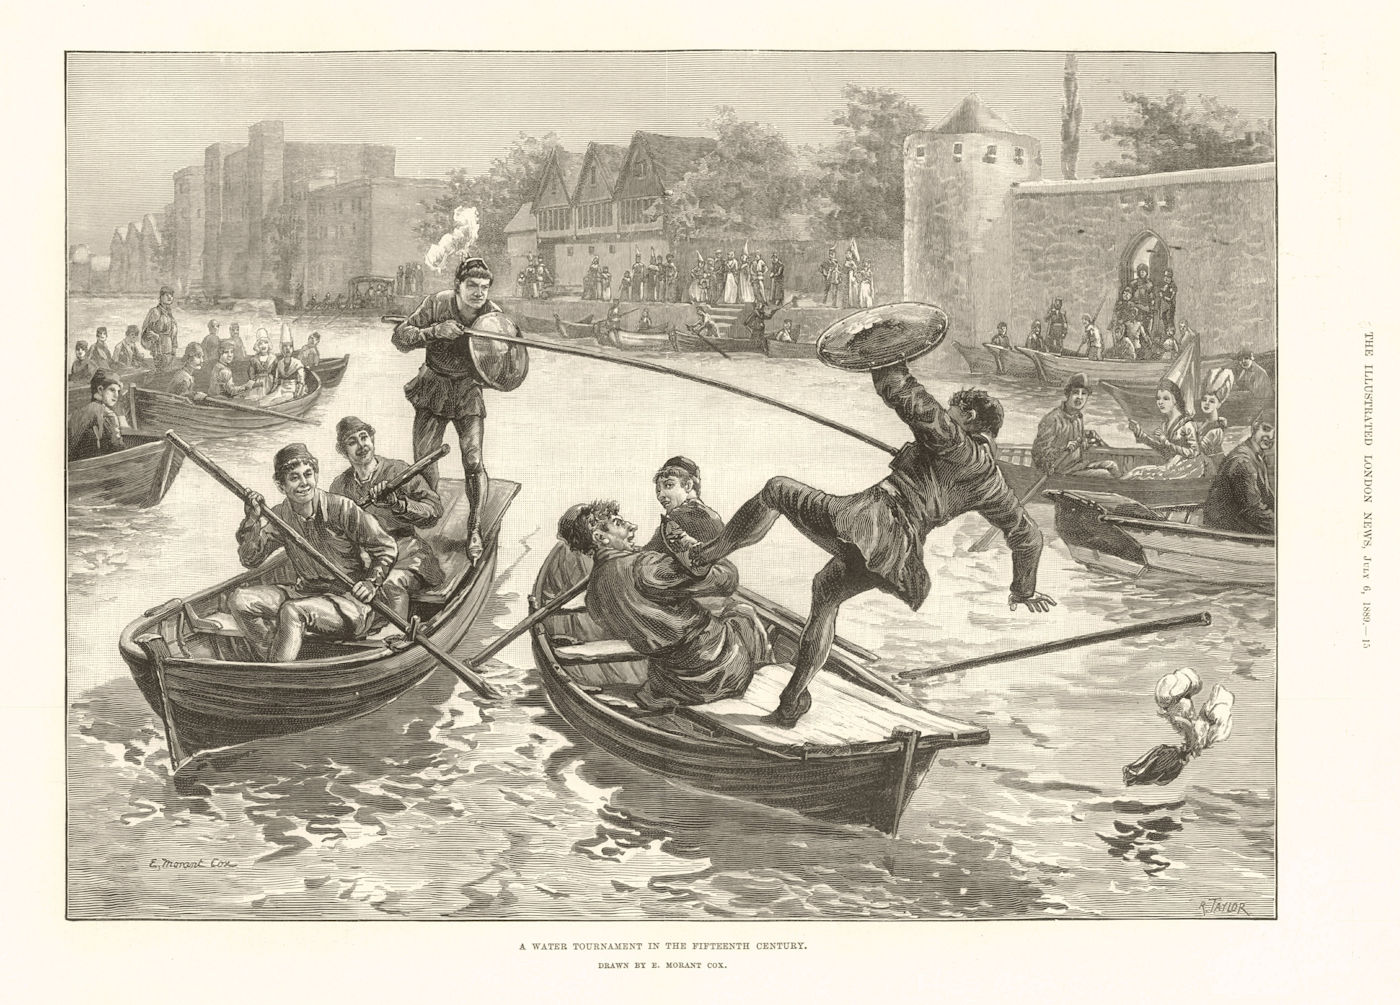 Associate Product A water tournament in the fifteenth century. Boats. Jousting 1889 old print